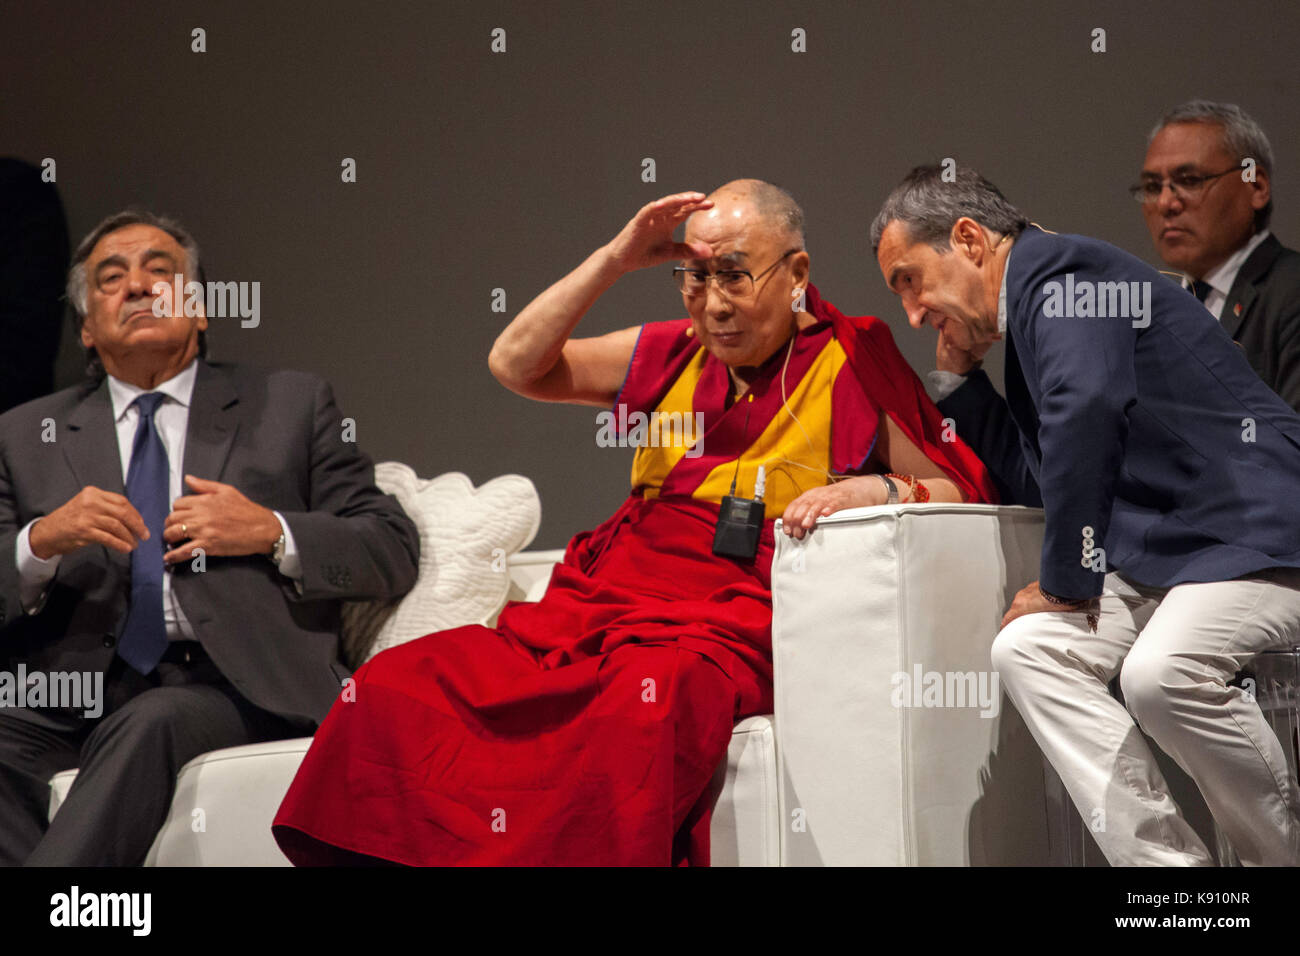 The XIV Dalai Lama takes to the stage to address the faithful in Palermo on September 18, 2017. Stock Photo